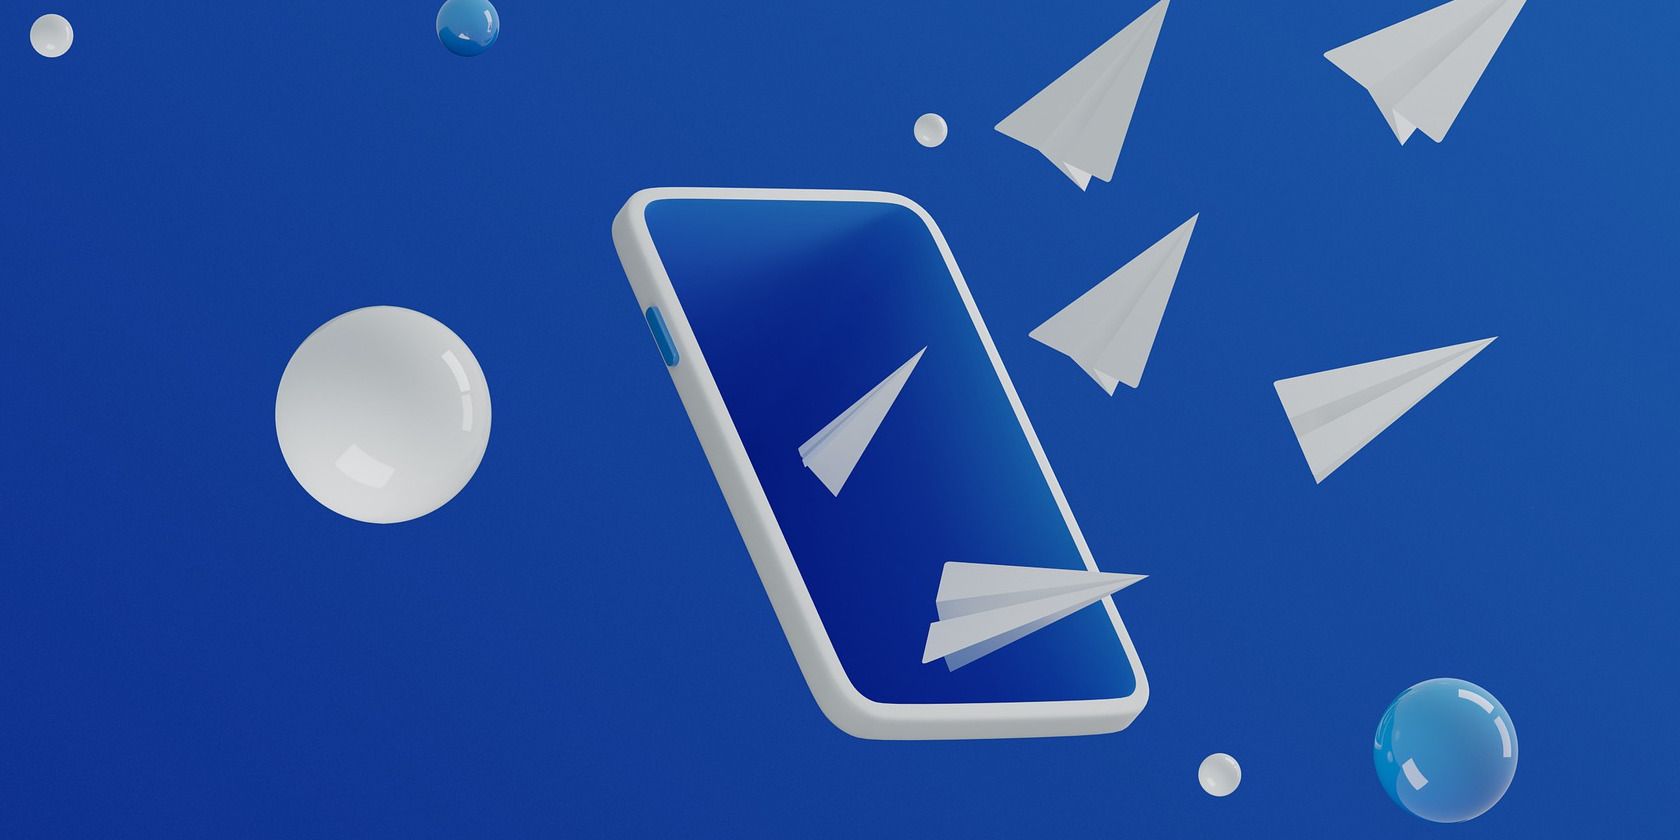 Graphic Of Mobile With Paper Airplanes Flying From Screen